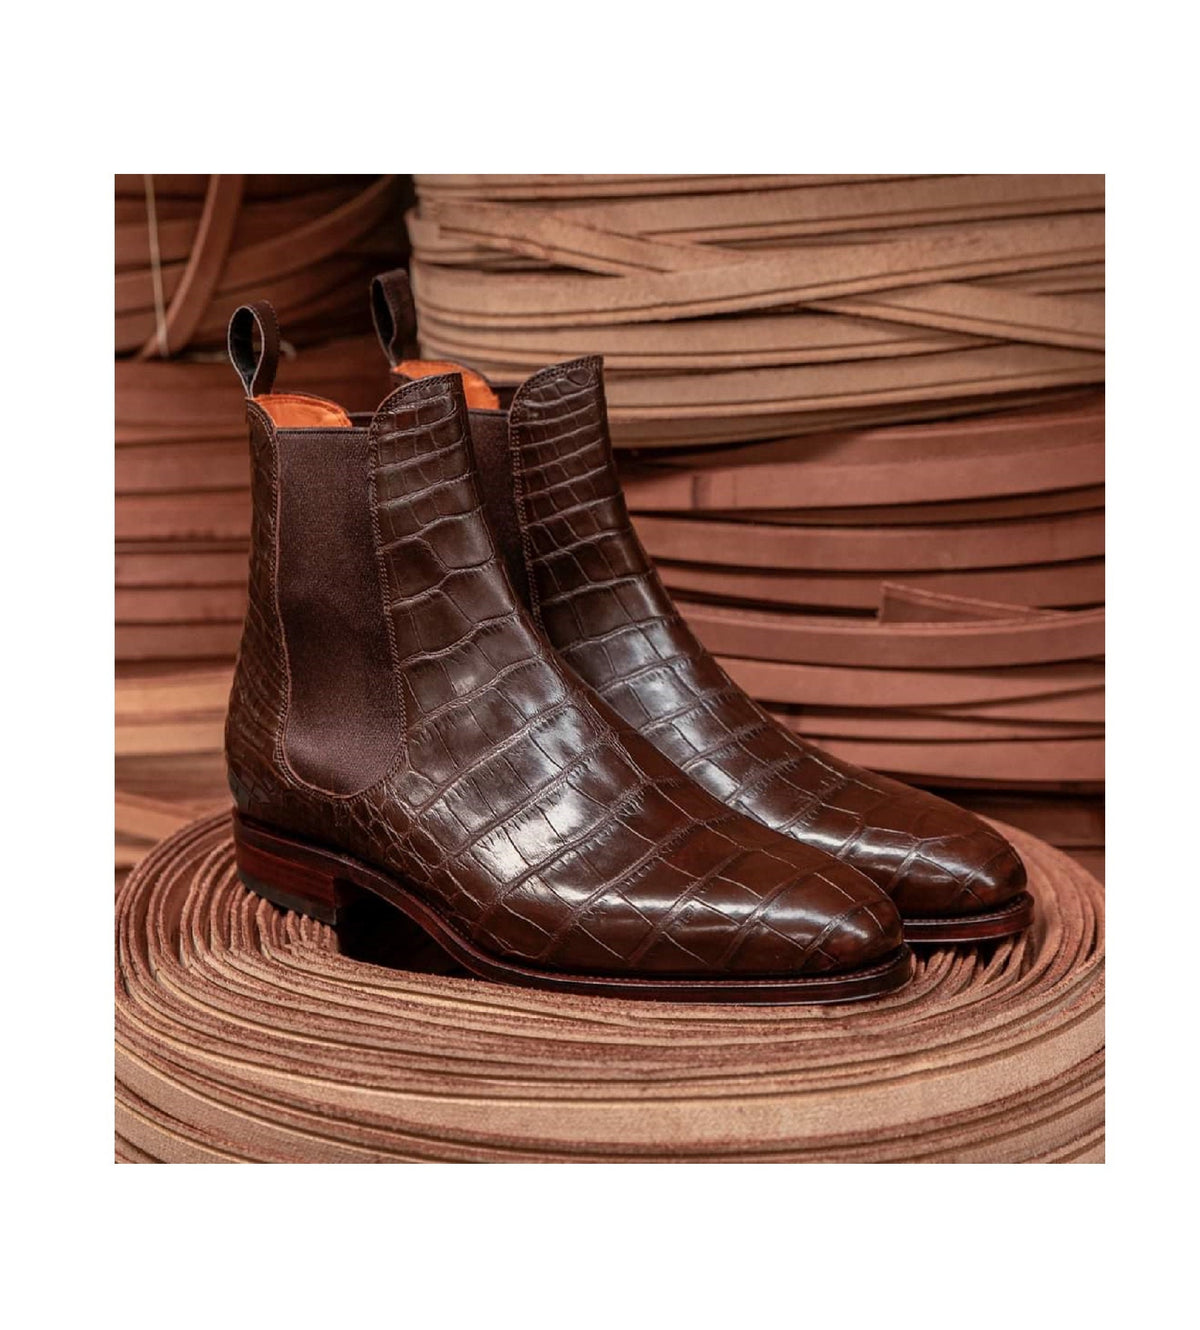 Men's Handmade Brown Color Chelsea Alligator Texture Pure Leather Ankle High Boots, Dress ankle Boot For Men's